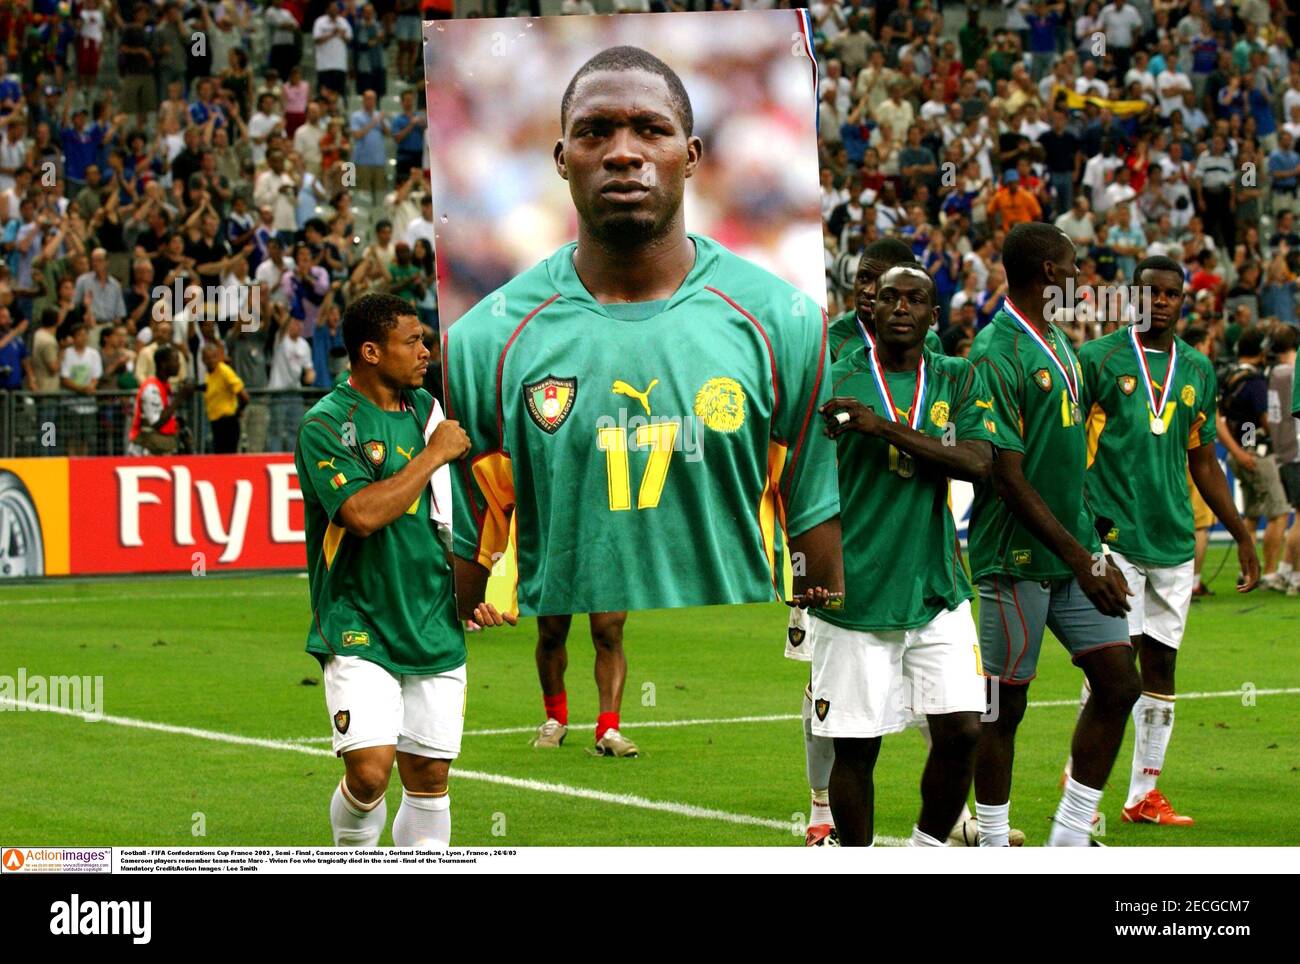 Football Fifa Confederations Cup France 03 Semi Final Cameroon V Colombia Gerland Stadium Lyon France 26 6 03 Cameroon Players Remember Team Mate Marc Vivien Foe